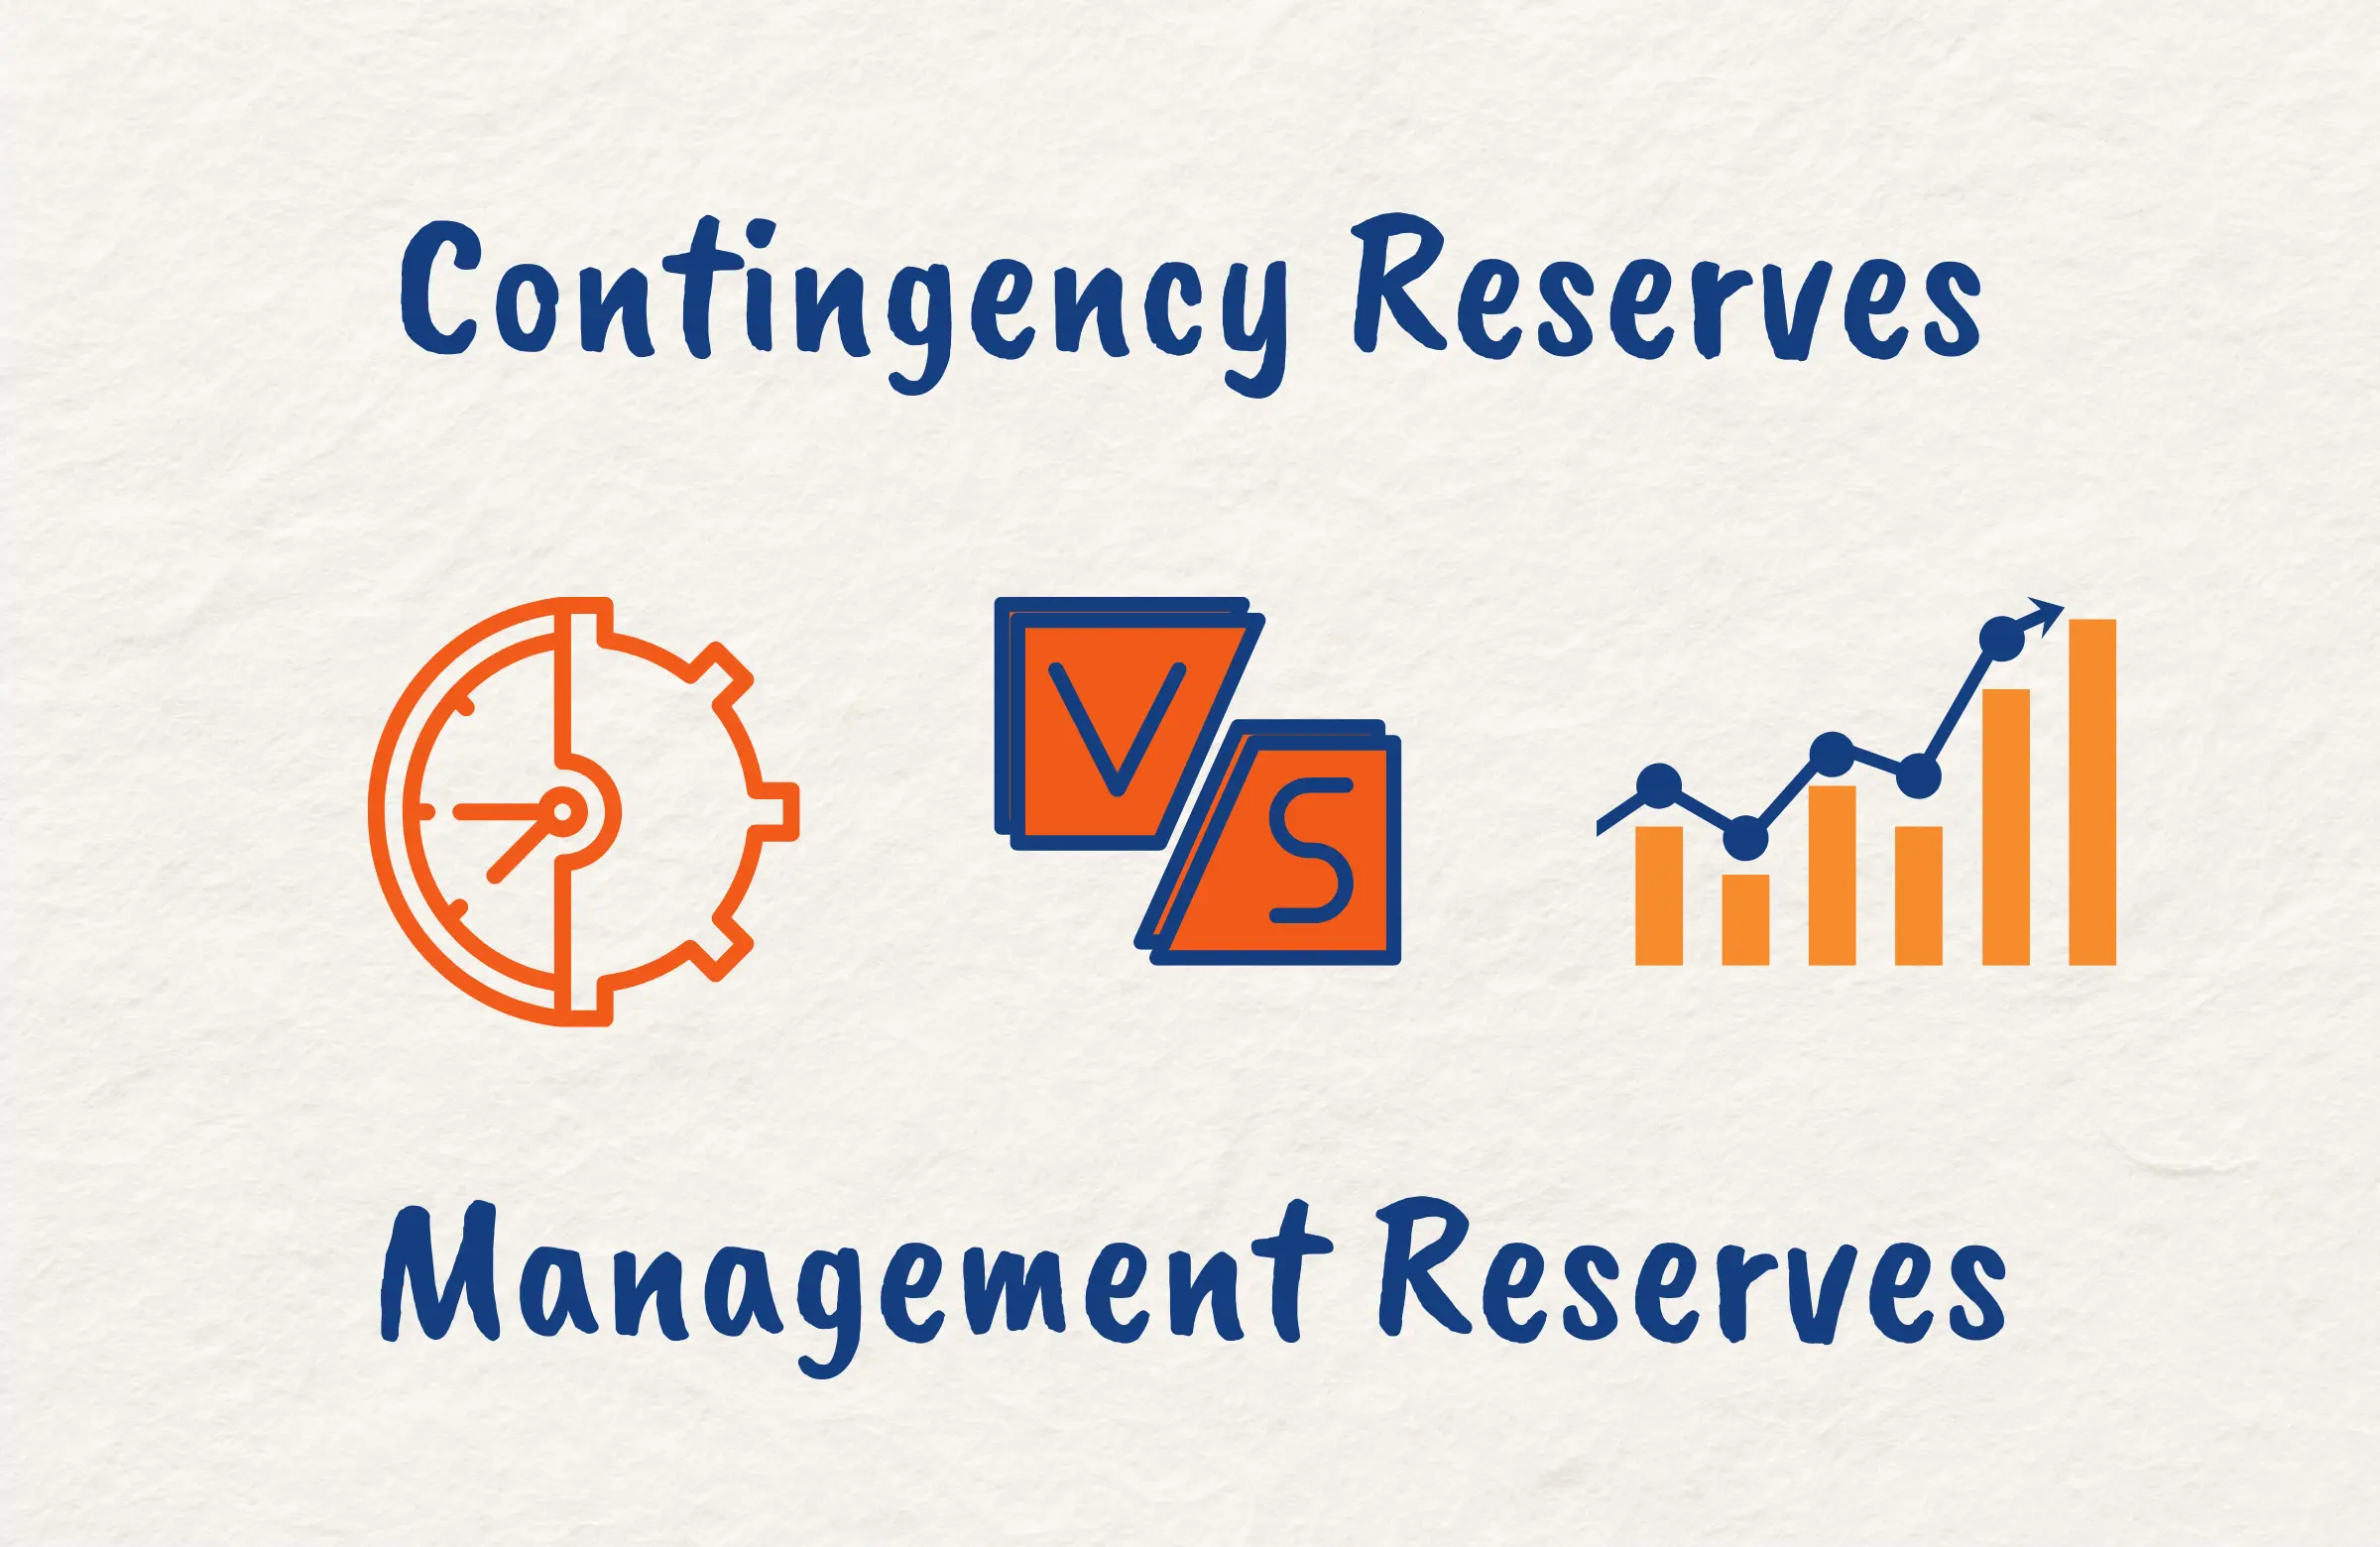 Difference Between Contingency Reserves and Management Reserves